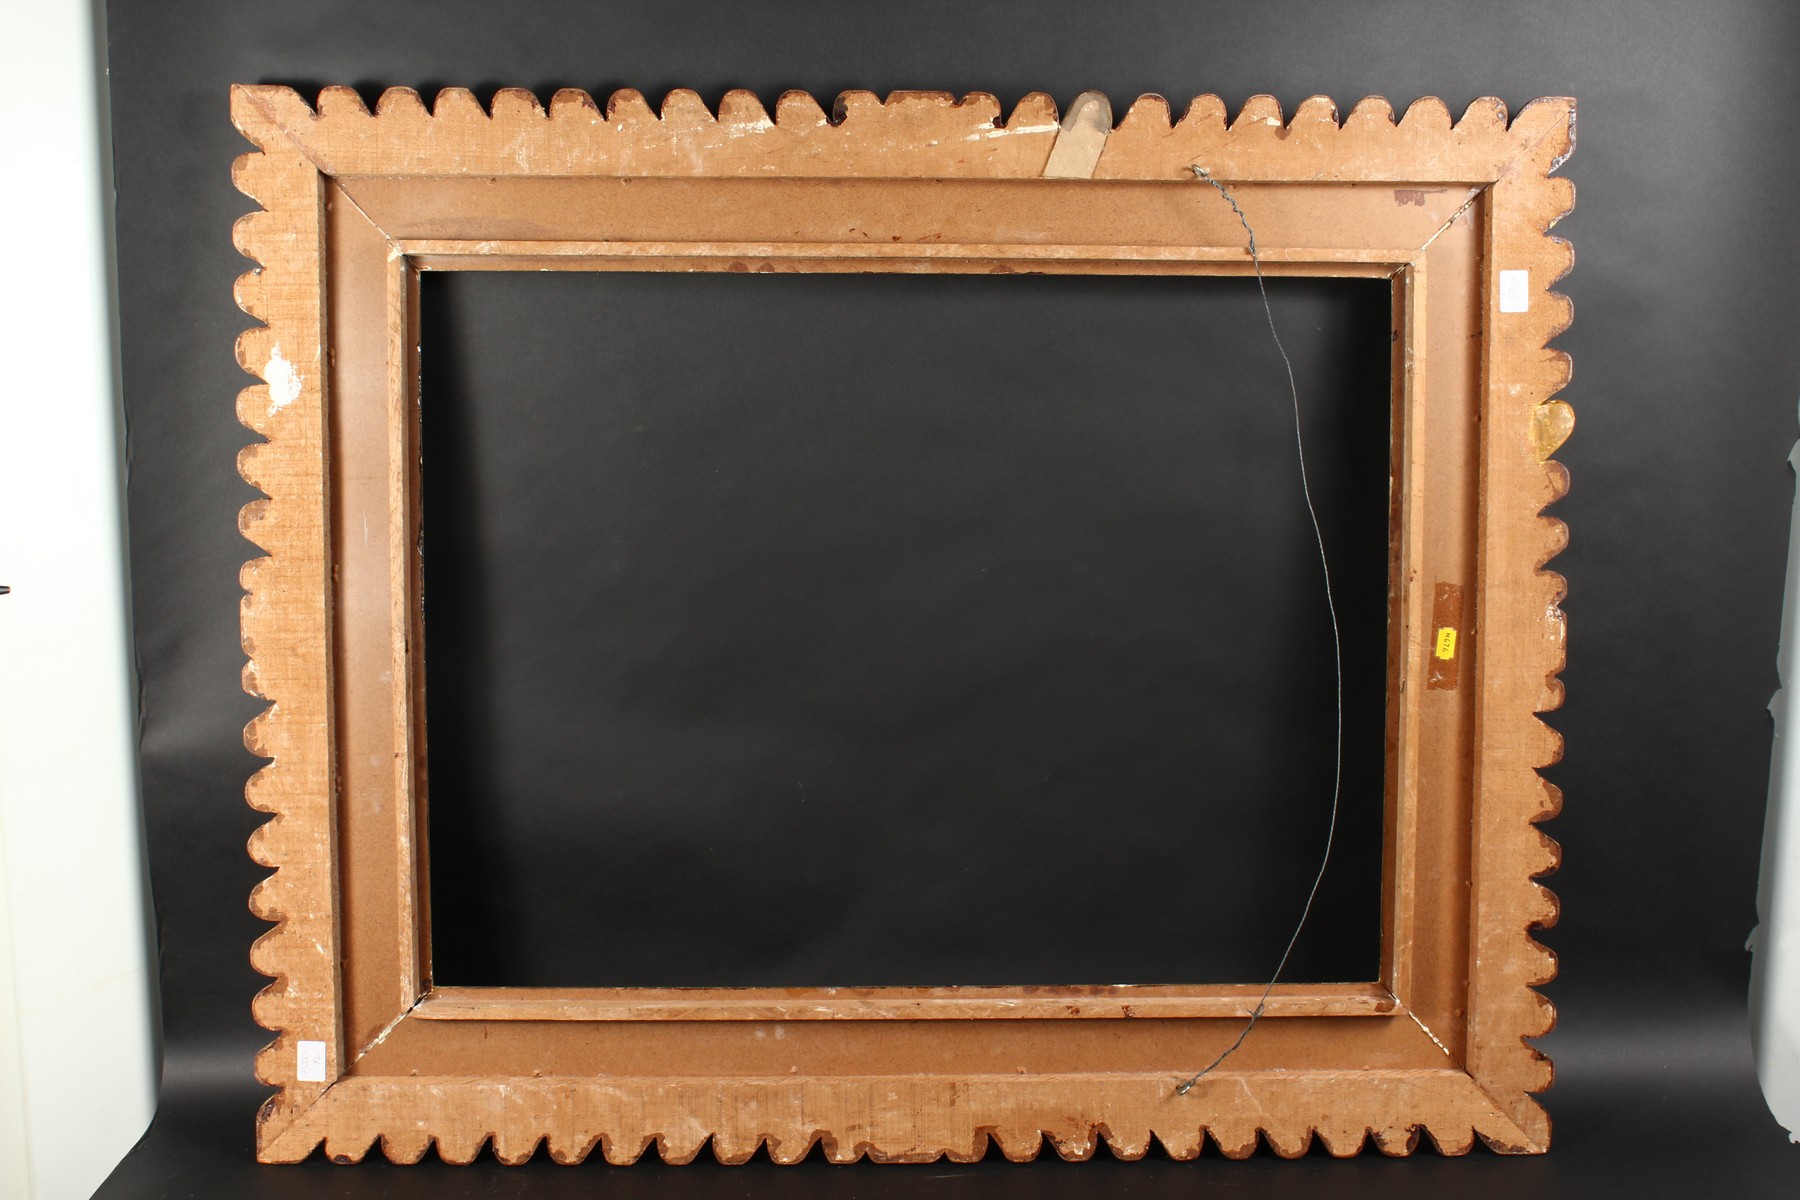 An Early 20th Century Carved Wood Frame with a Heavy Knulled Edge. 30" x 22.5" - 76.25cm x 57cm. ( - Image 3 of 3